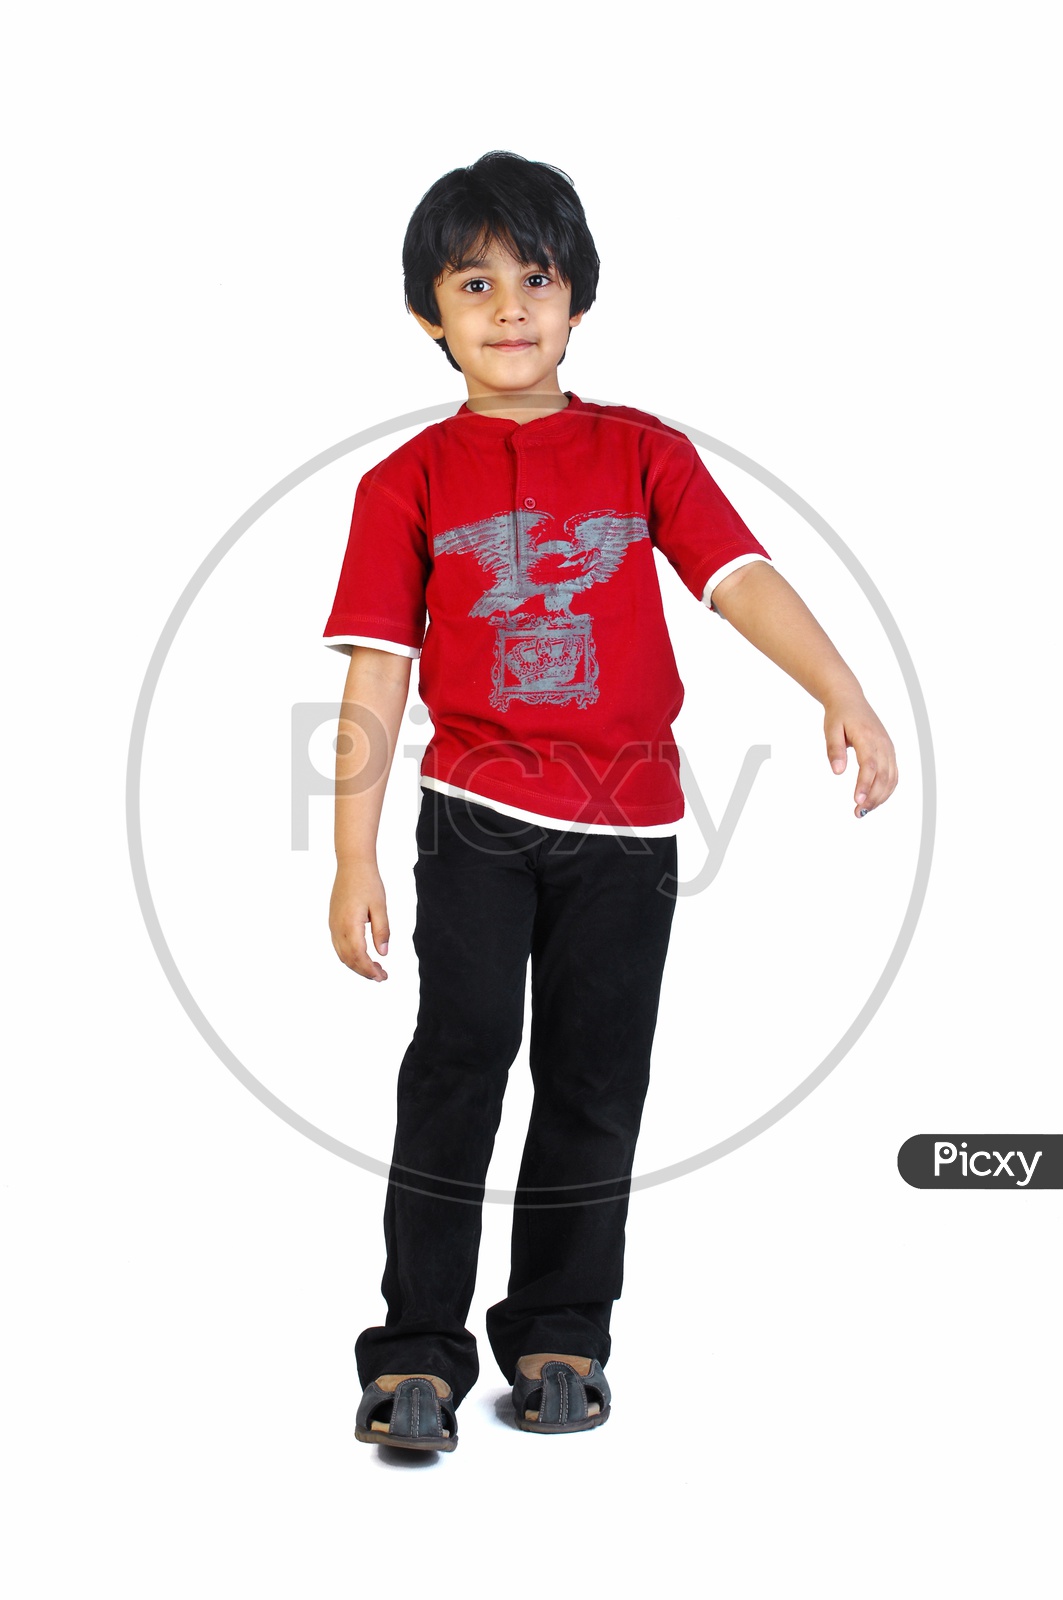 An Indian boy smiling in red tshirt - white background